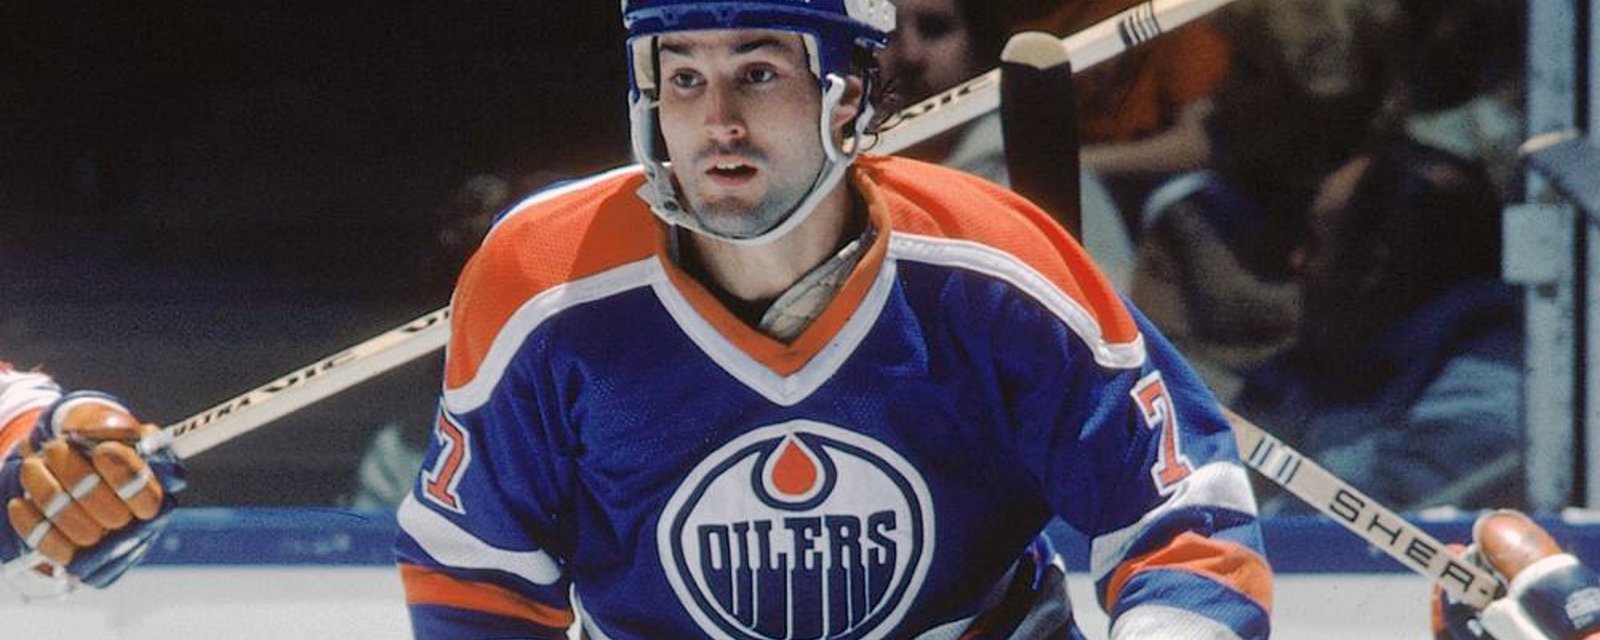 Paul Coffey: “I wish there was more hitting” in modern NHL